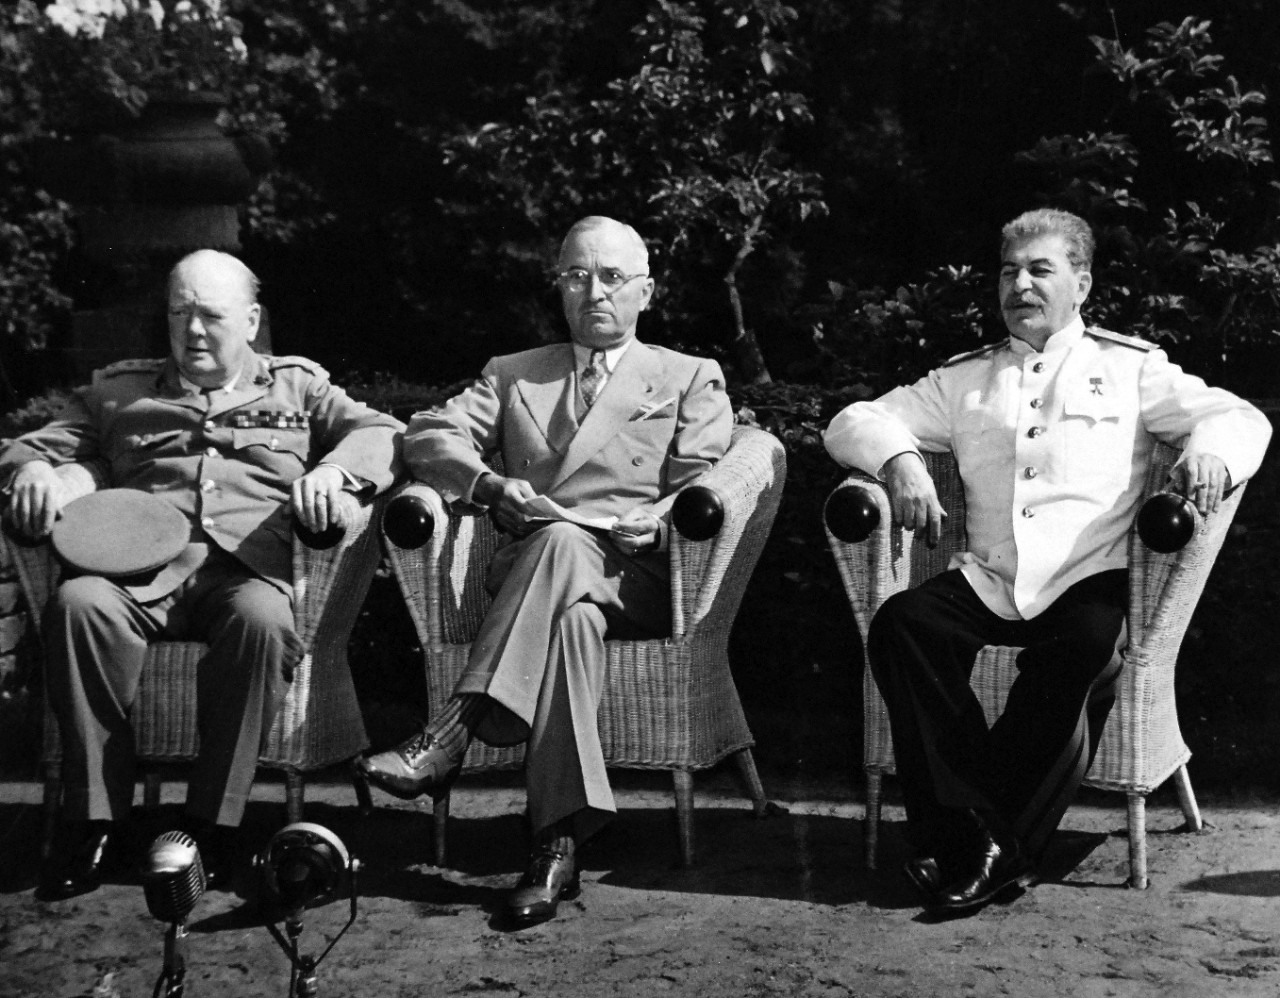 80-G-700110: Potsdam Conference, July-August 1945.  The “Big Three” at Potsdam, Germany, pose for a formal photograph in garden near the meeting palace.  Left to right:  Prime Minister Winston S. Churchill; President Harry S. Truman, and Premier Joseph Stalin.  Photographed released July 25, 1945.  Official U.S. Navy Photograph, now in the collections of the National Archives.  (2016/02/23).